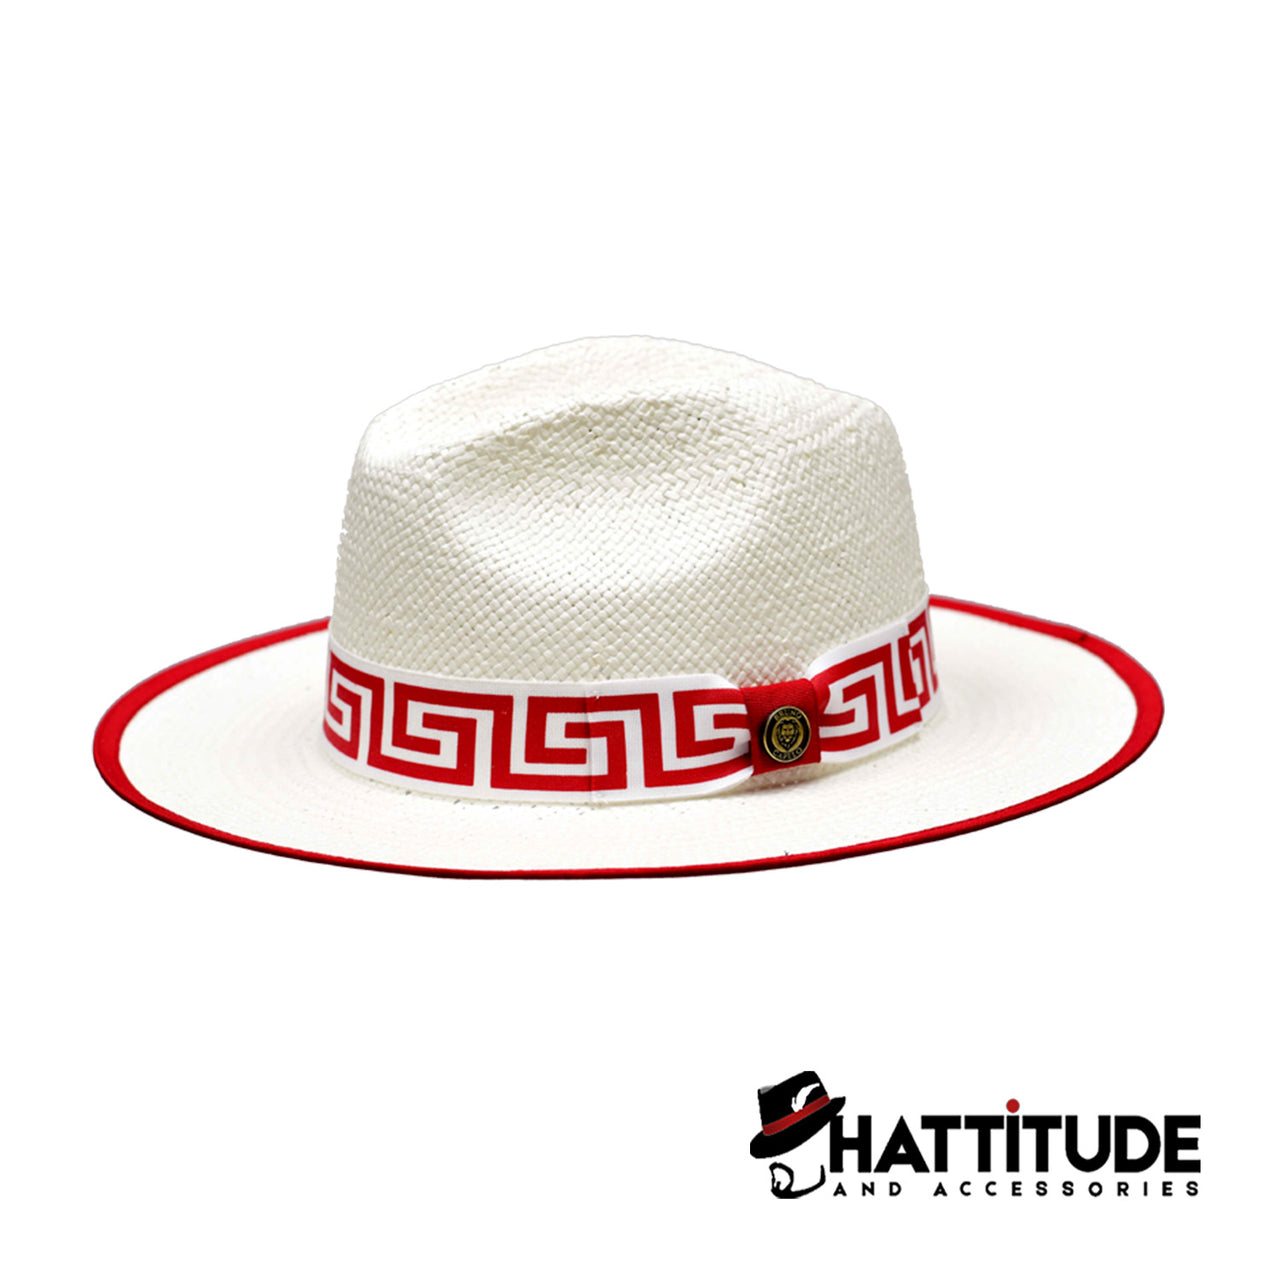 Valentino White with Red band - Hattitude